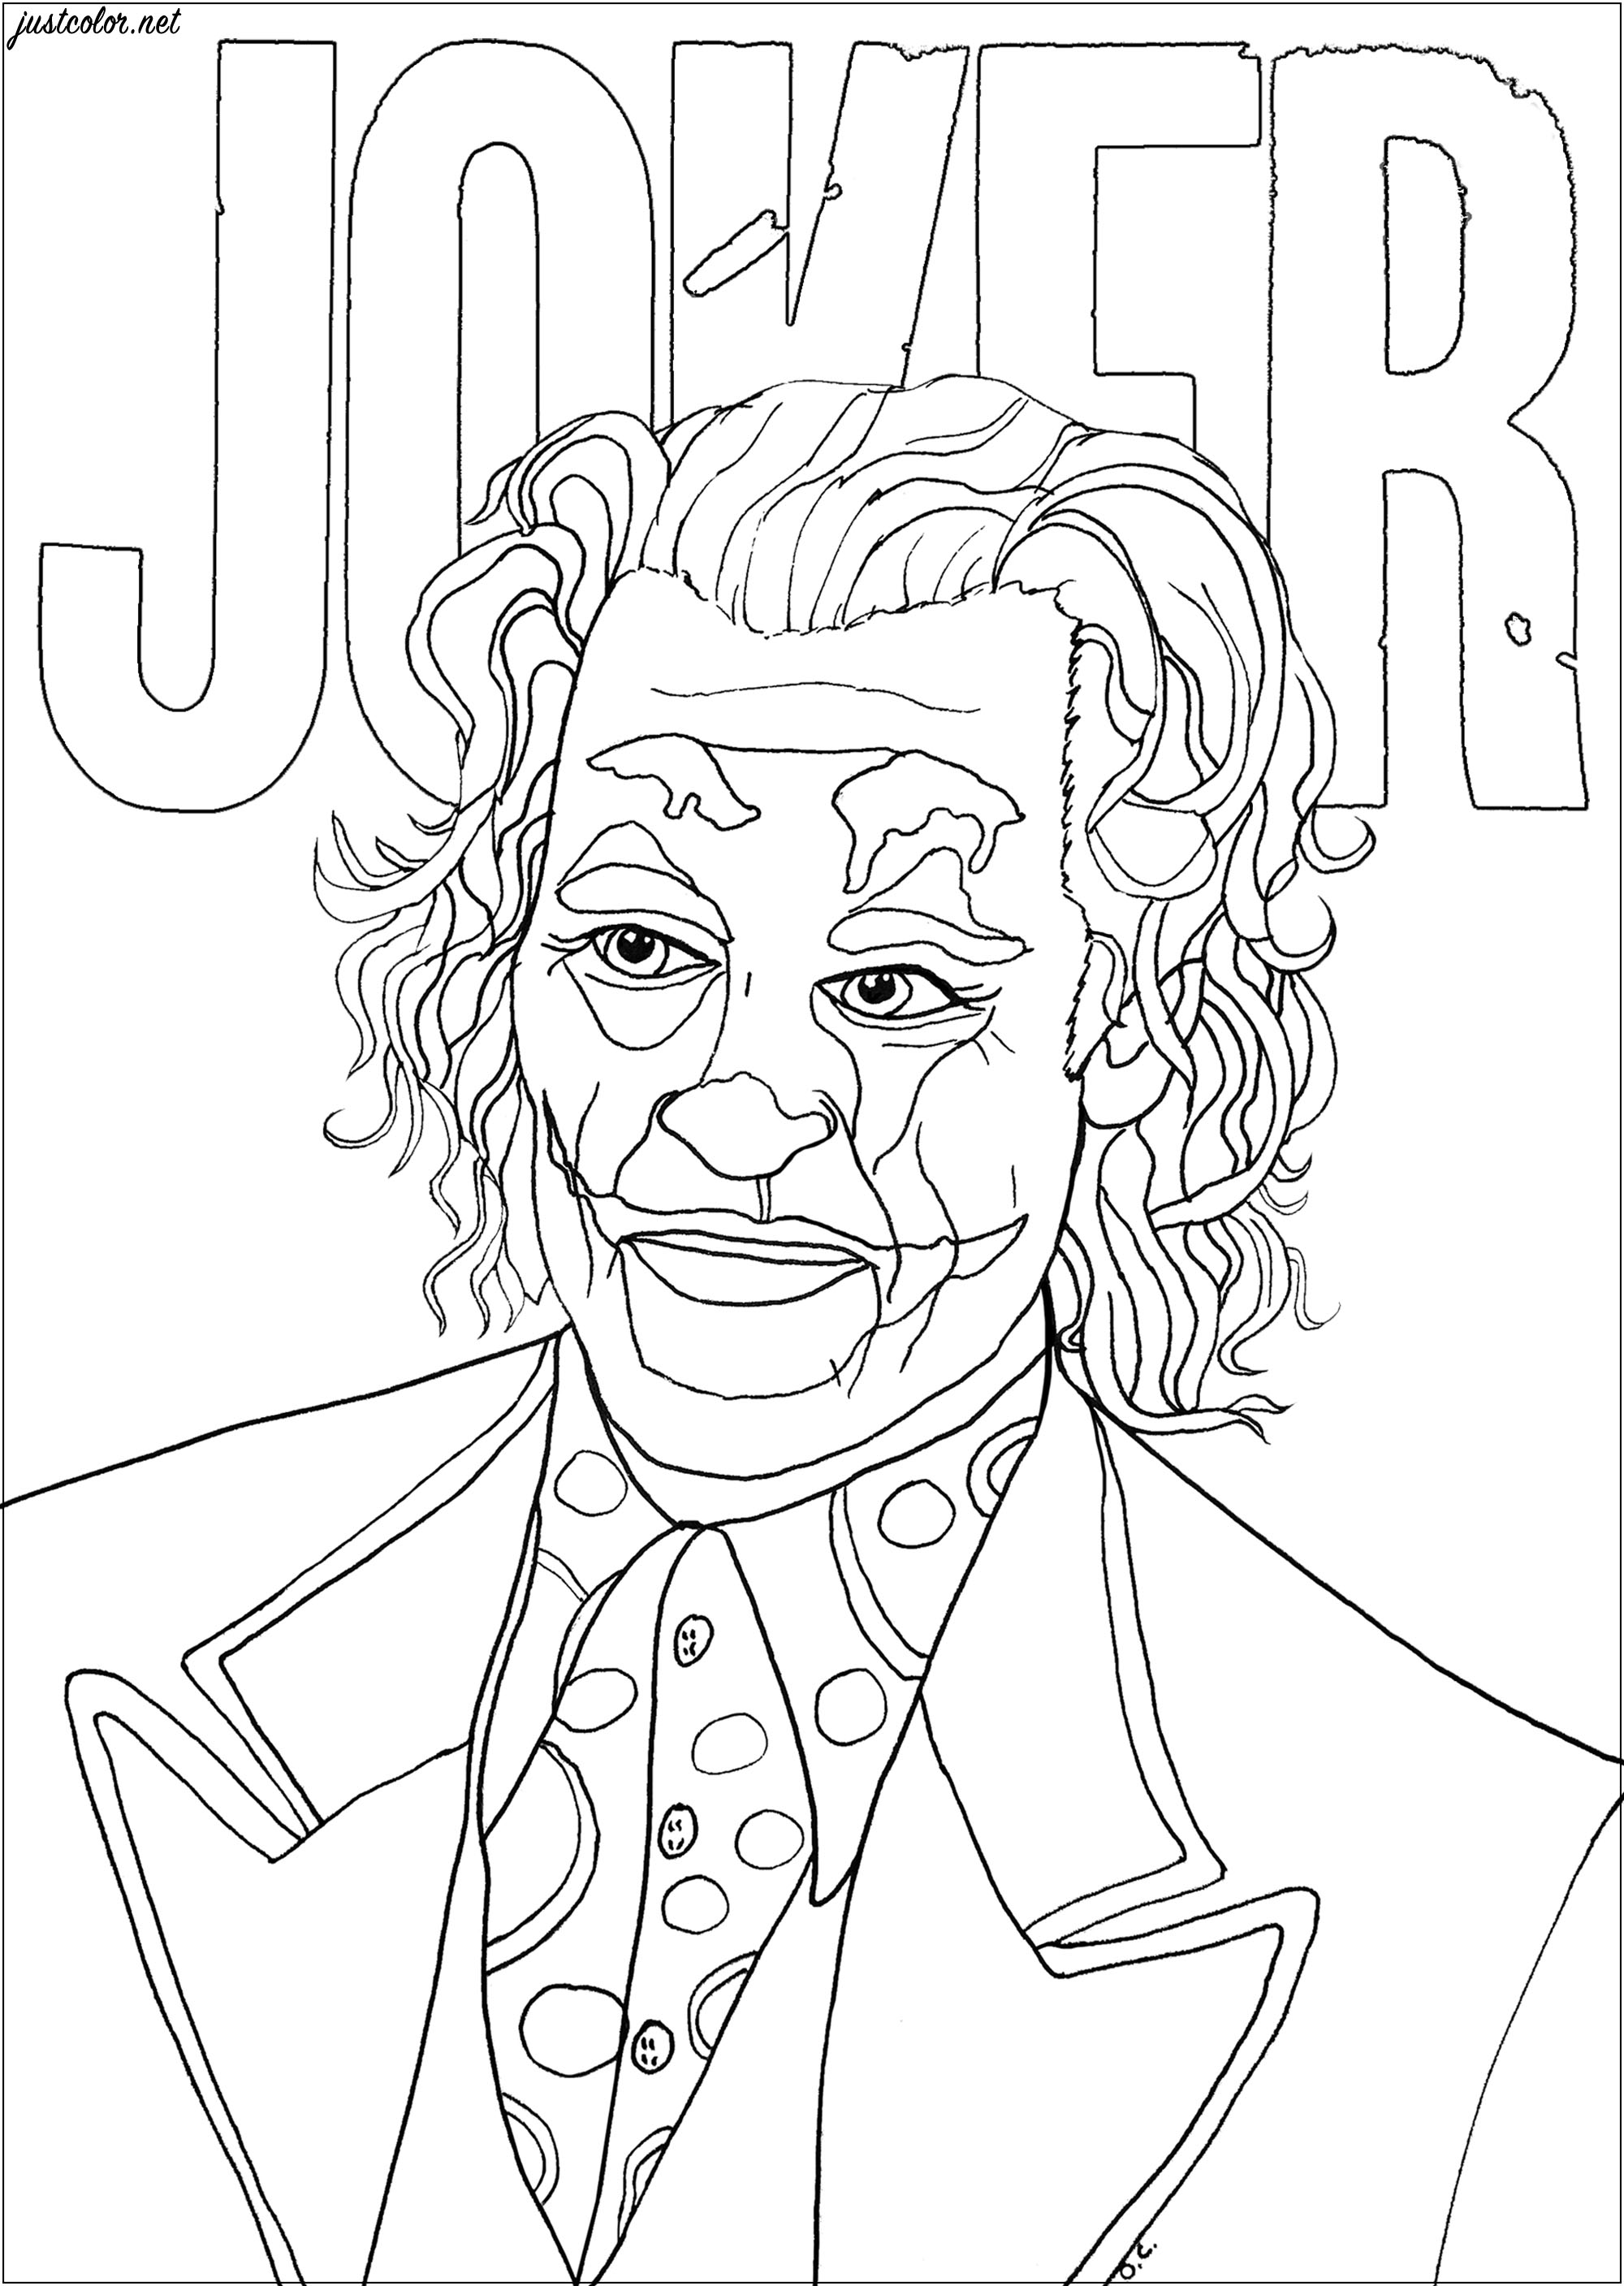 Coloring page inspired by the Joker, played by Joaquin Phoenix in the 2019 film directed by Todd Phillips. Joker is considered as the main DC Comics supervillain, Artist : Olivier